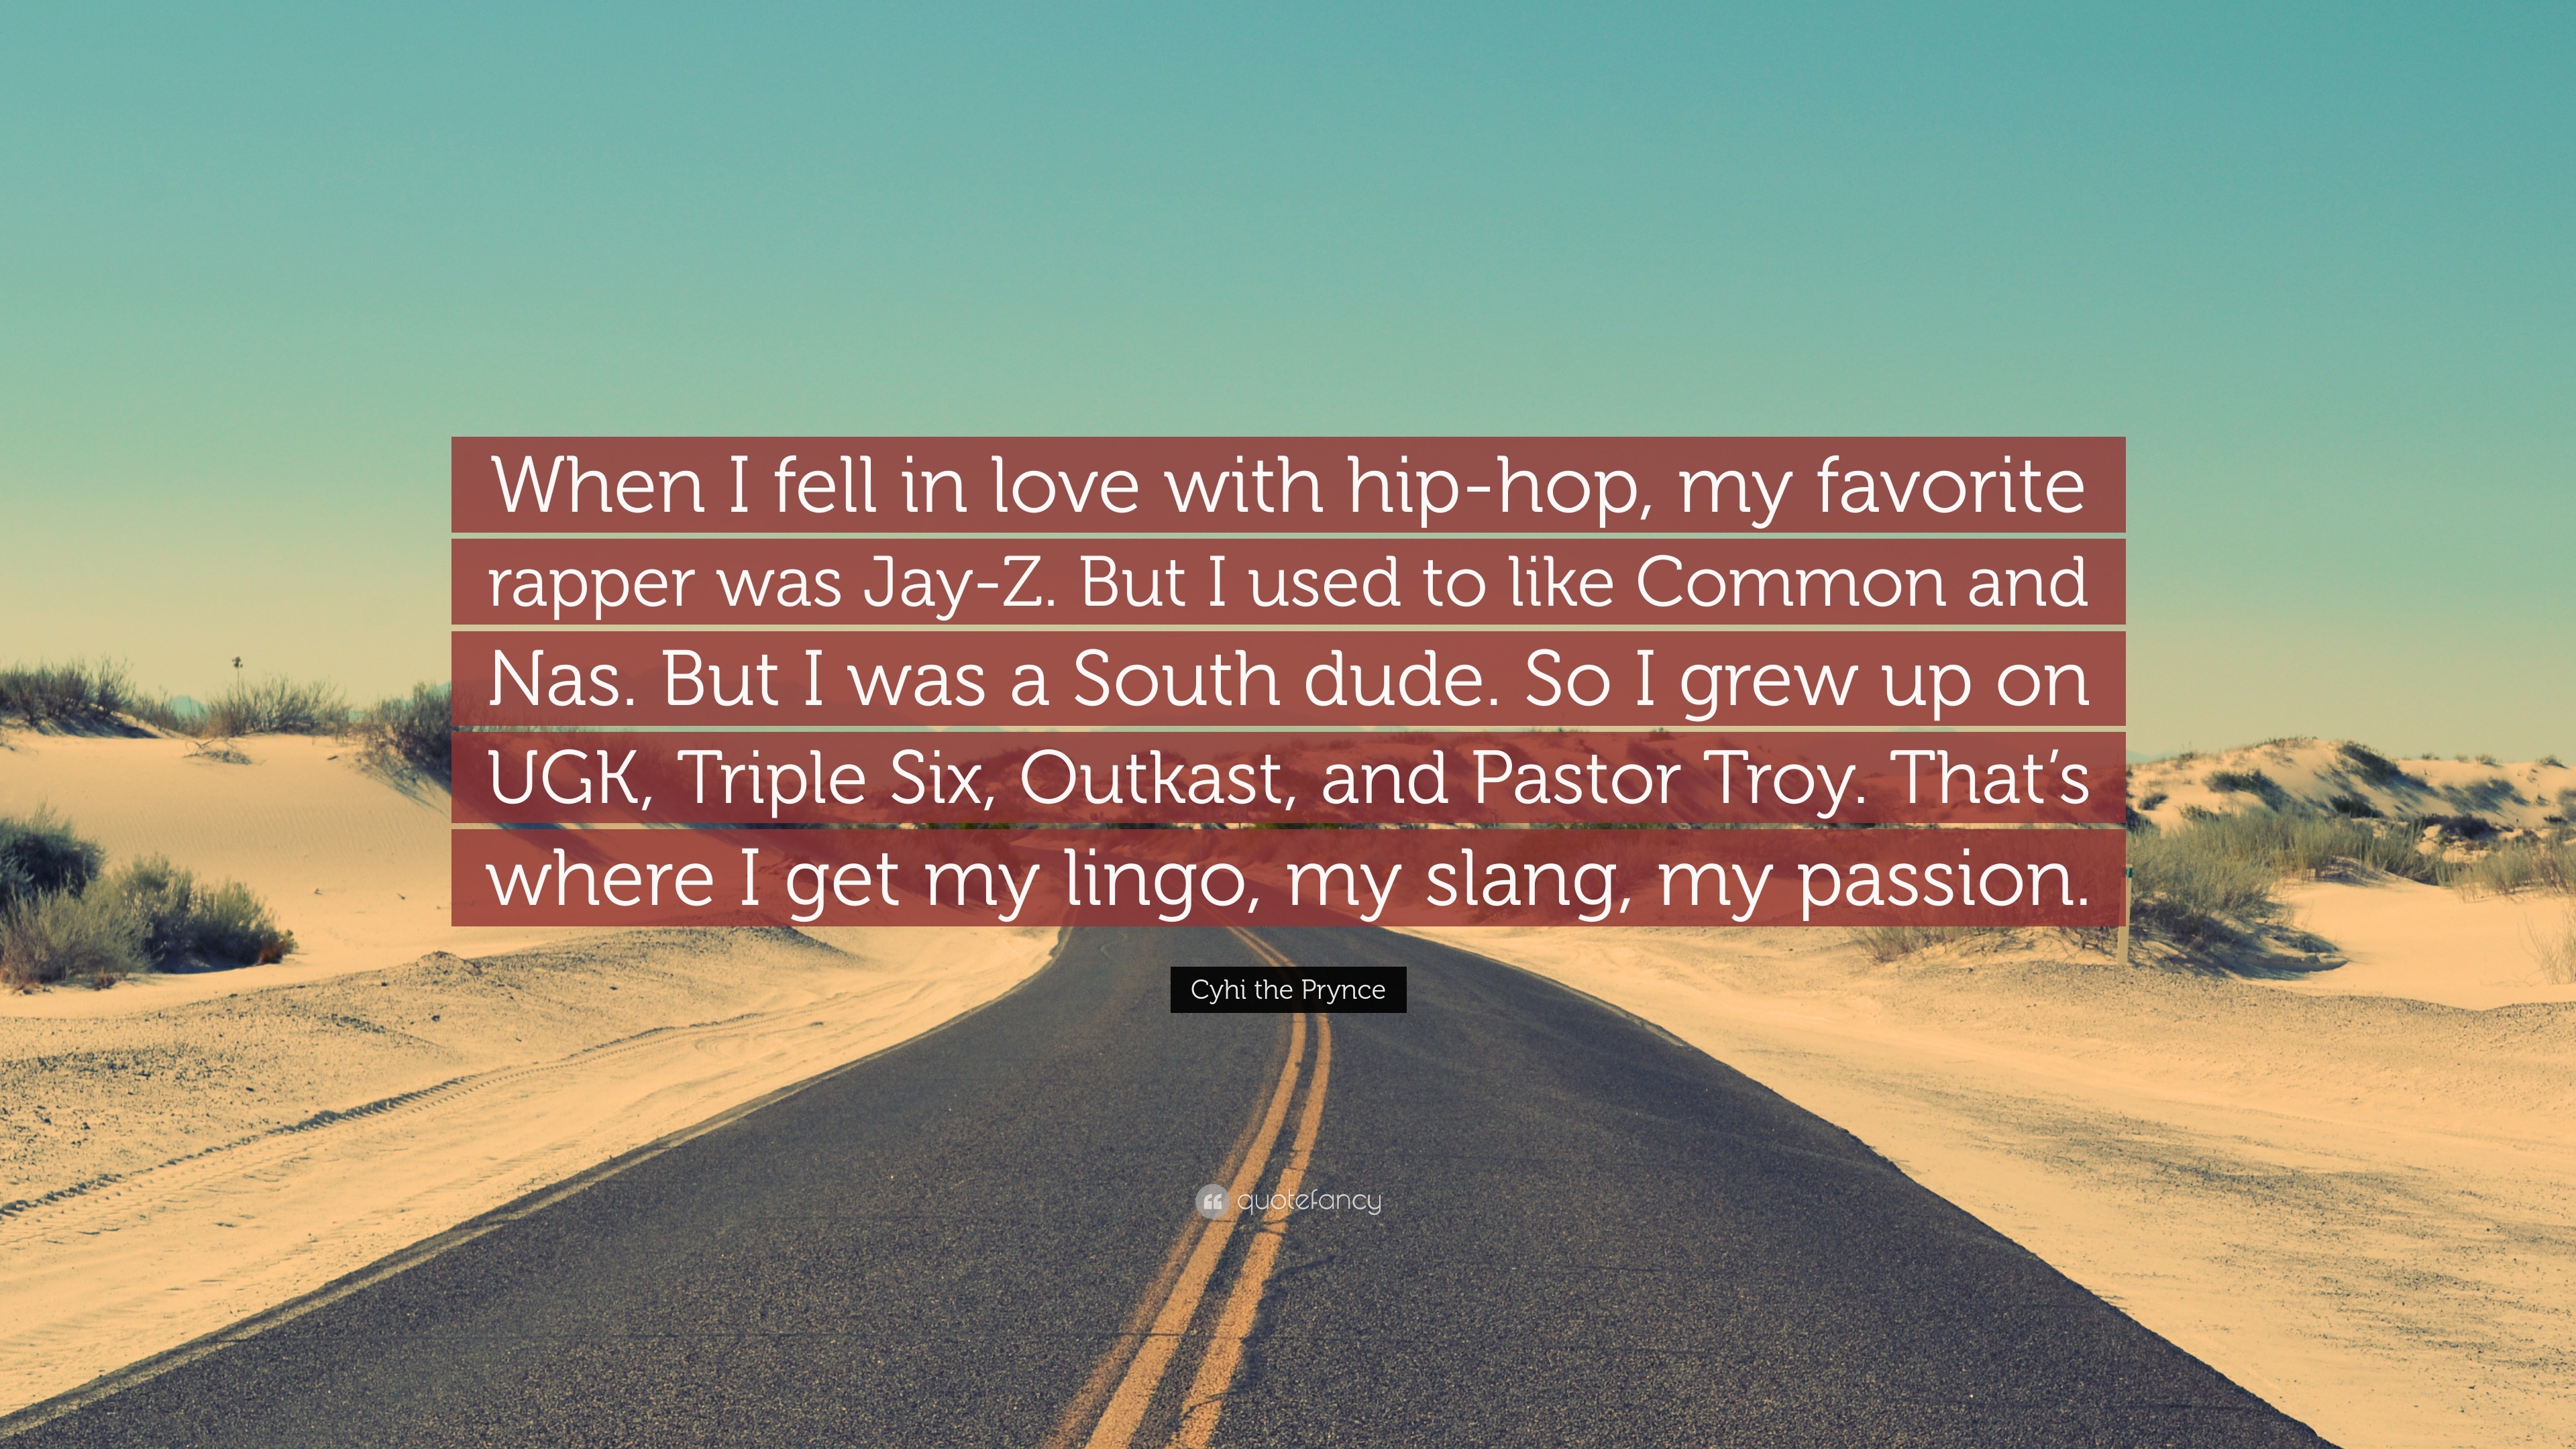 When I Fell in Love With Hip-Hop